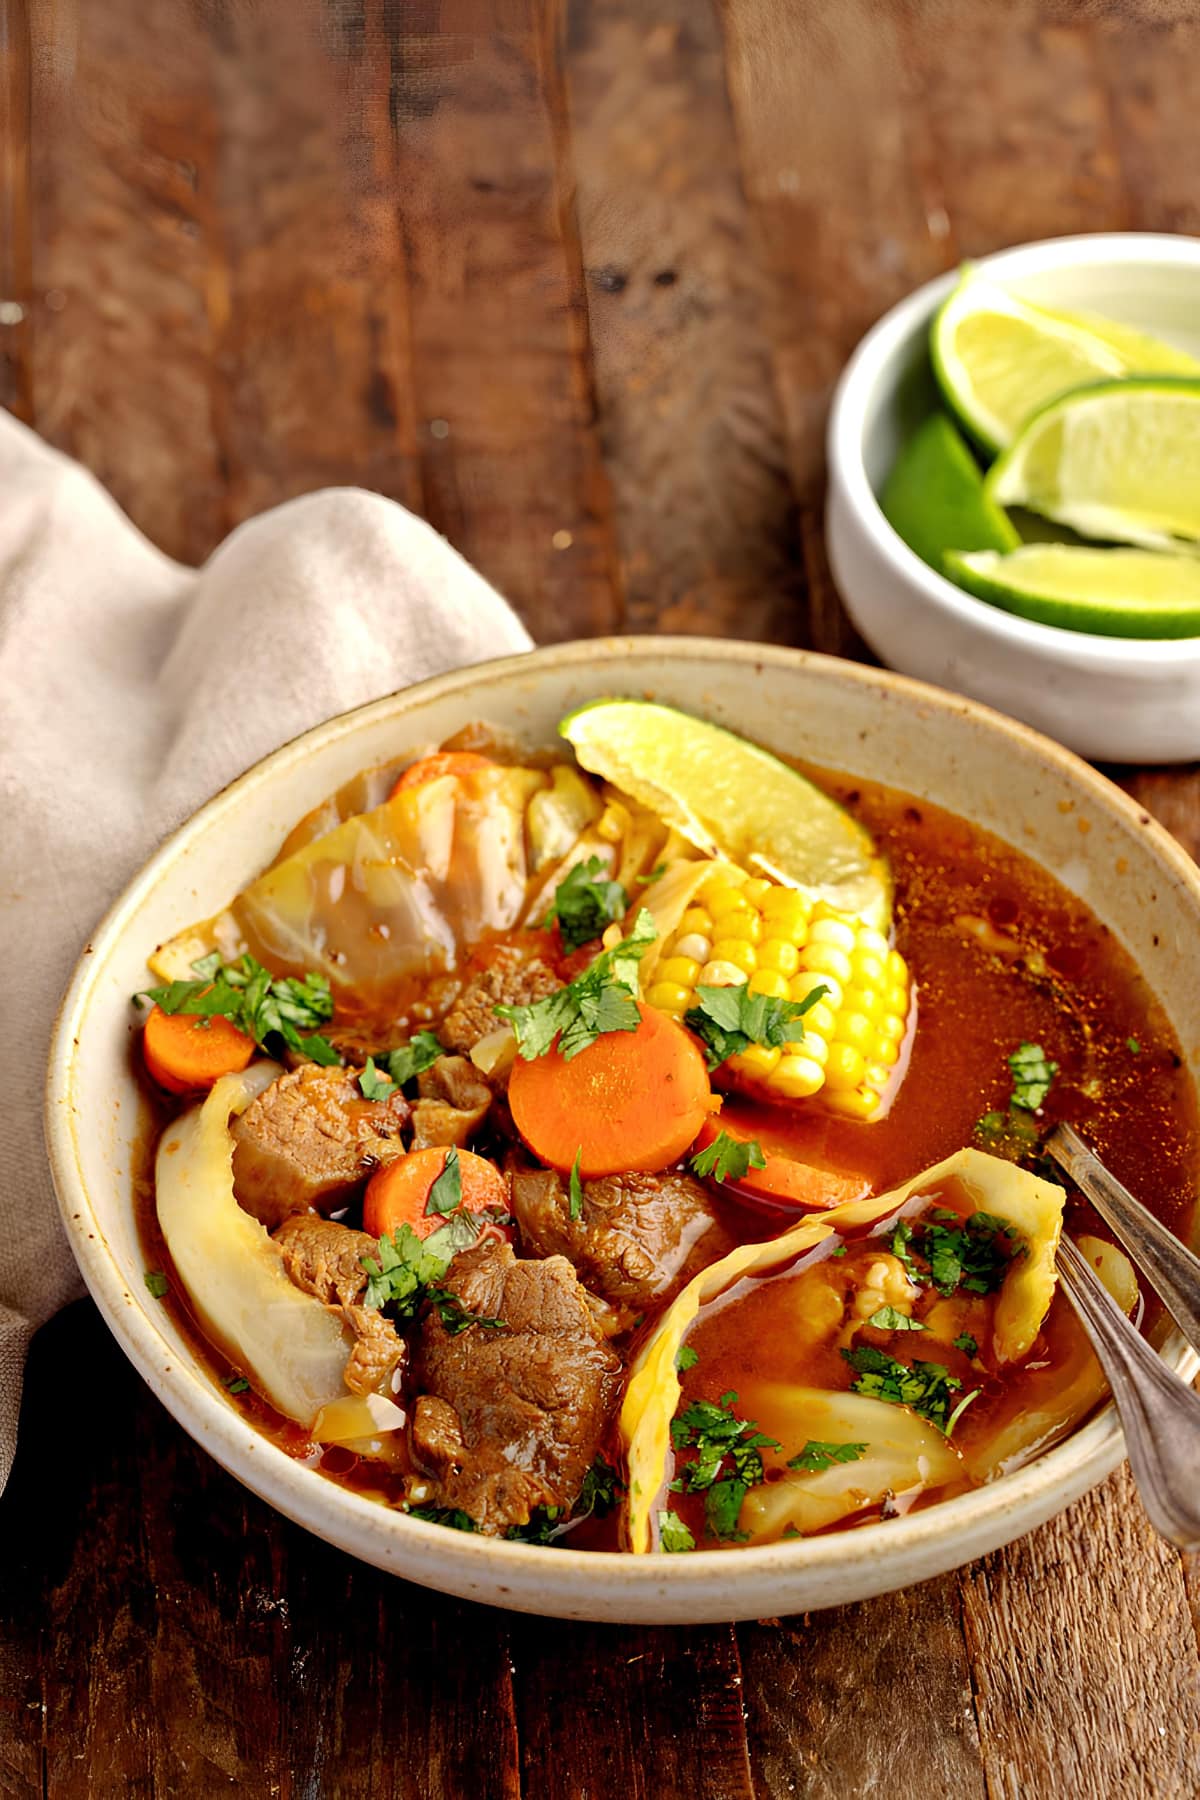 Caldo de Res or Mexican Beef Soup with Lime, Carrots, Cabbage and Herbs